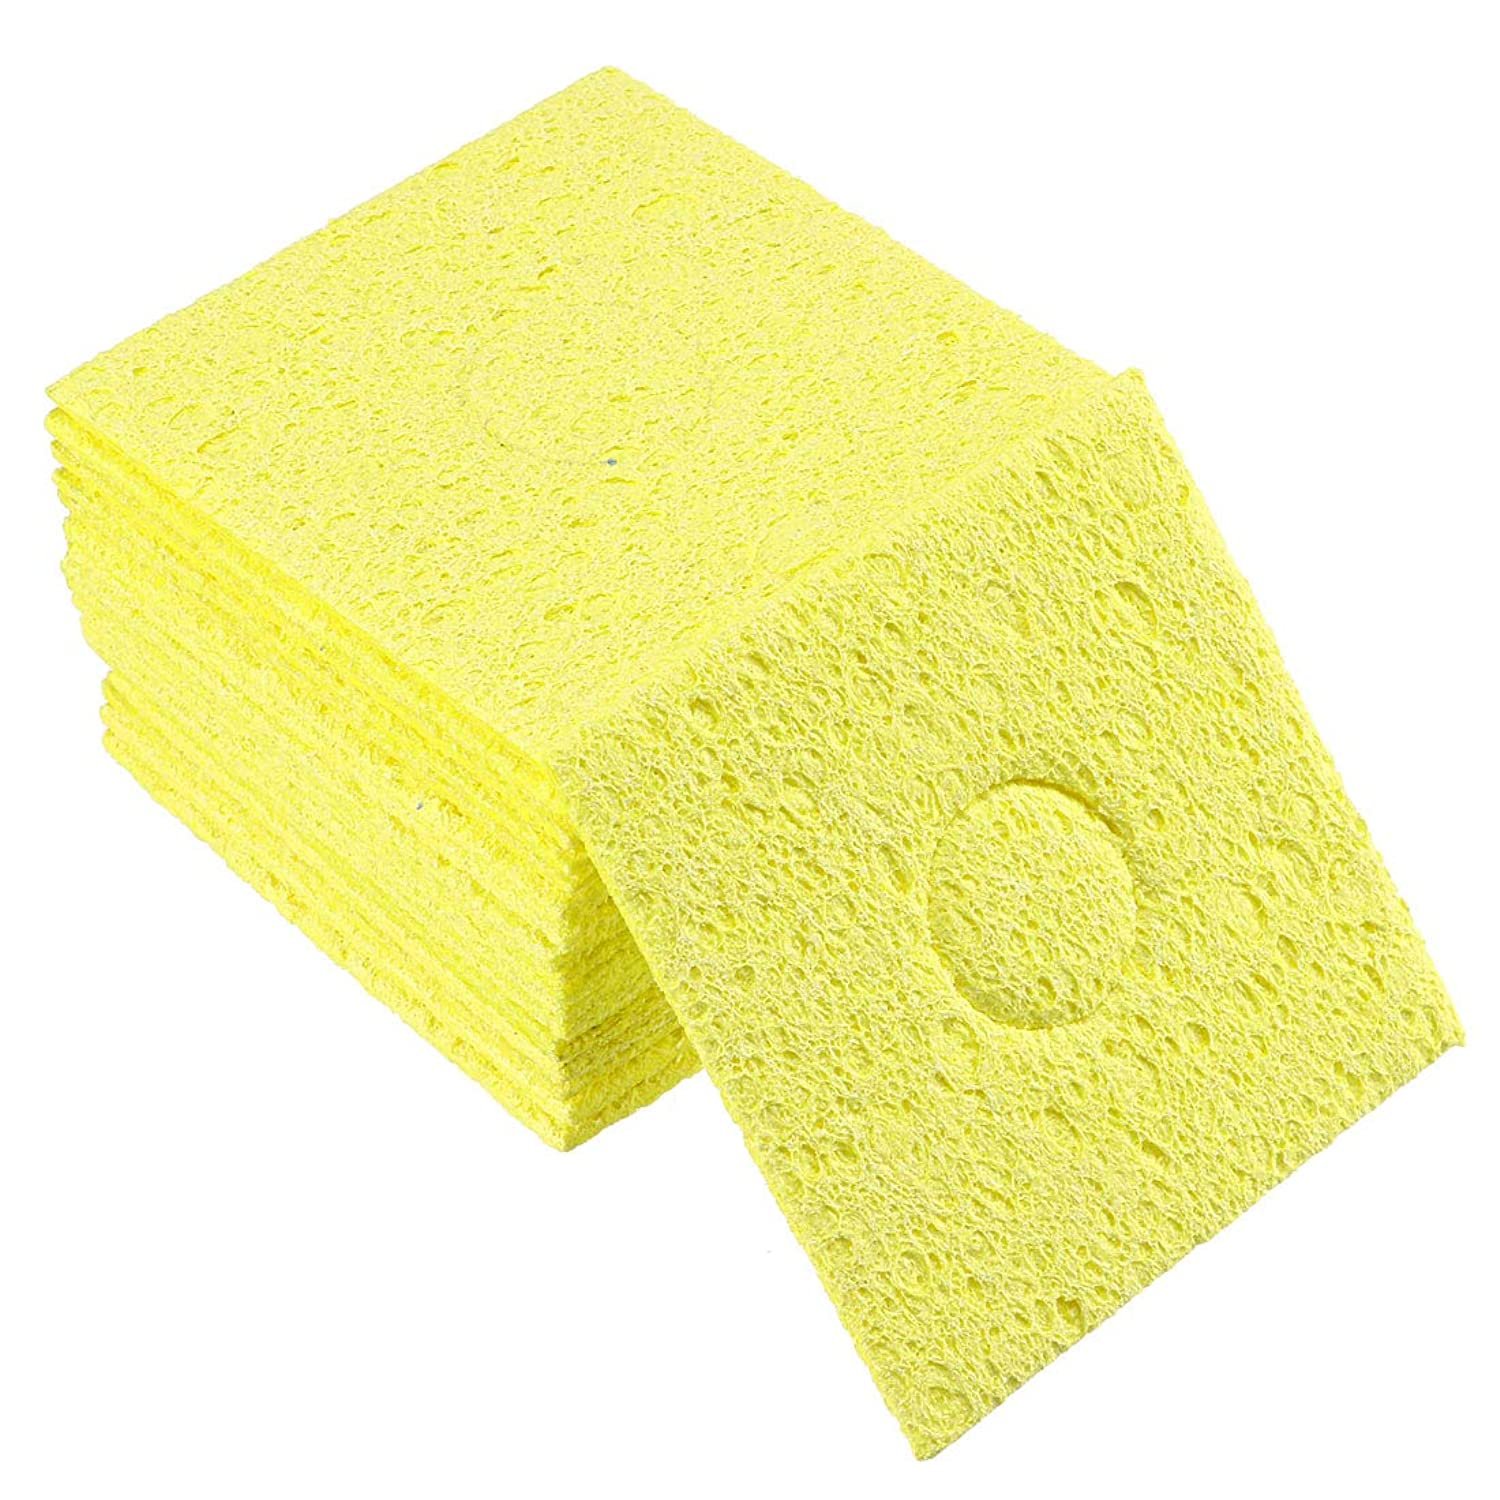 uxcell Soldering Sponge 56x56x2.2mm for Iron Tips Cleaner, Square Yellow 20pcs